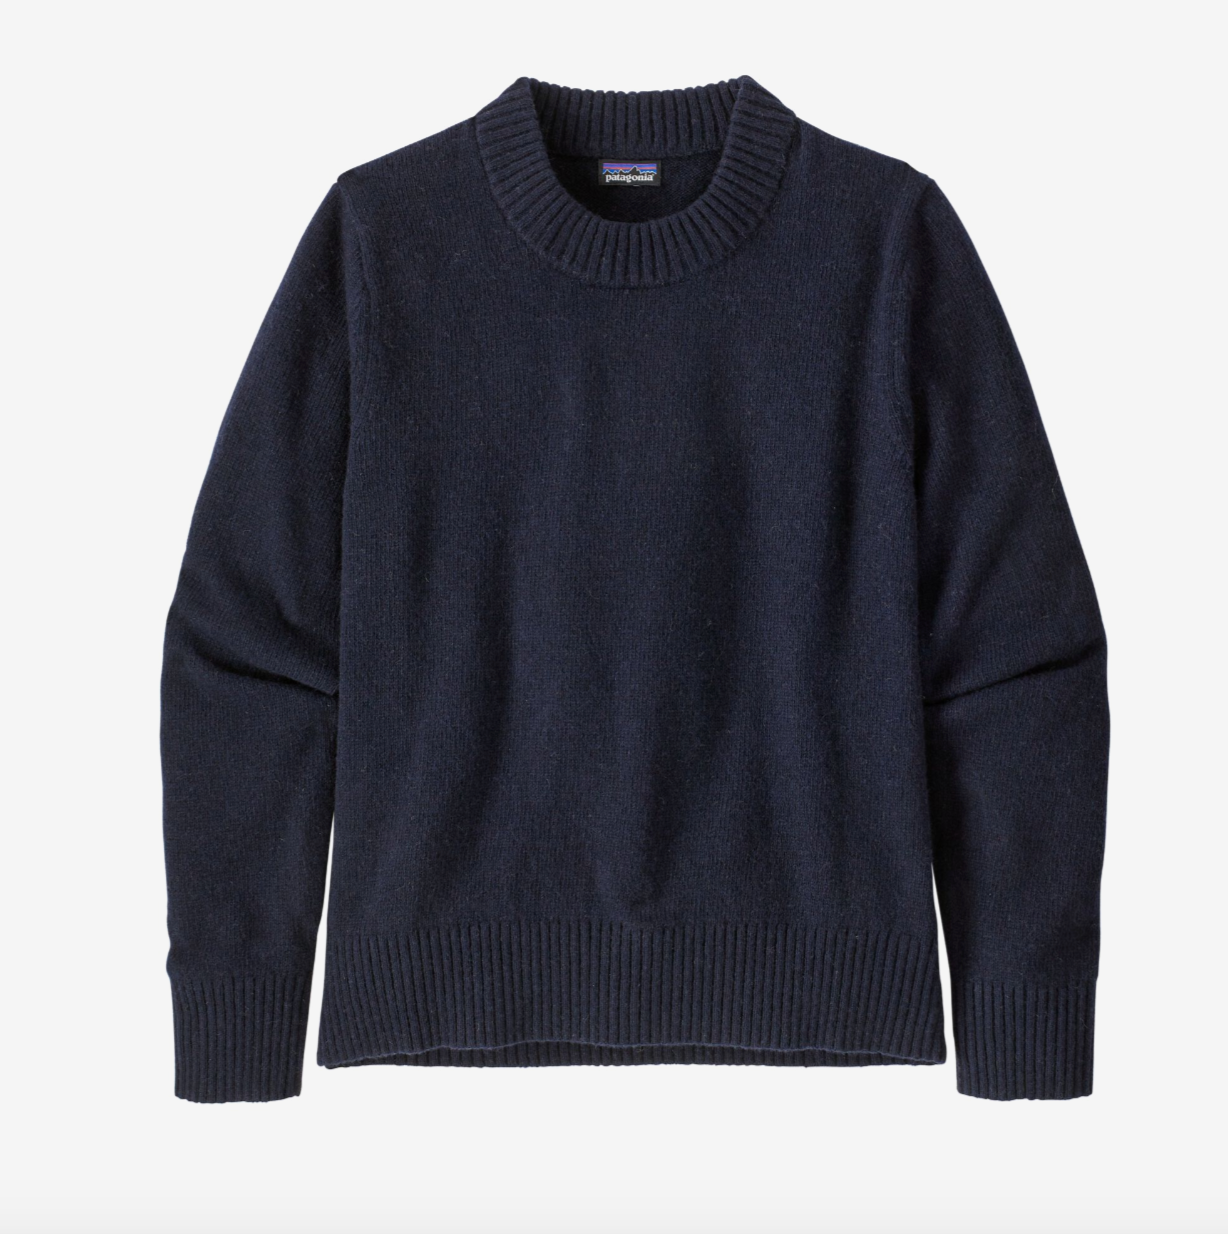 Women's Recycled Wool Crewneck Sweater - New Navy